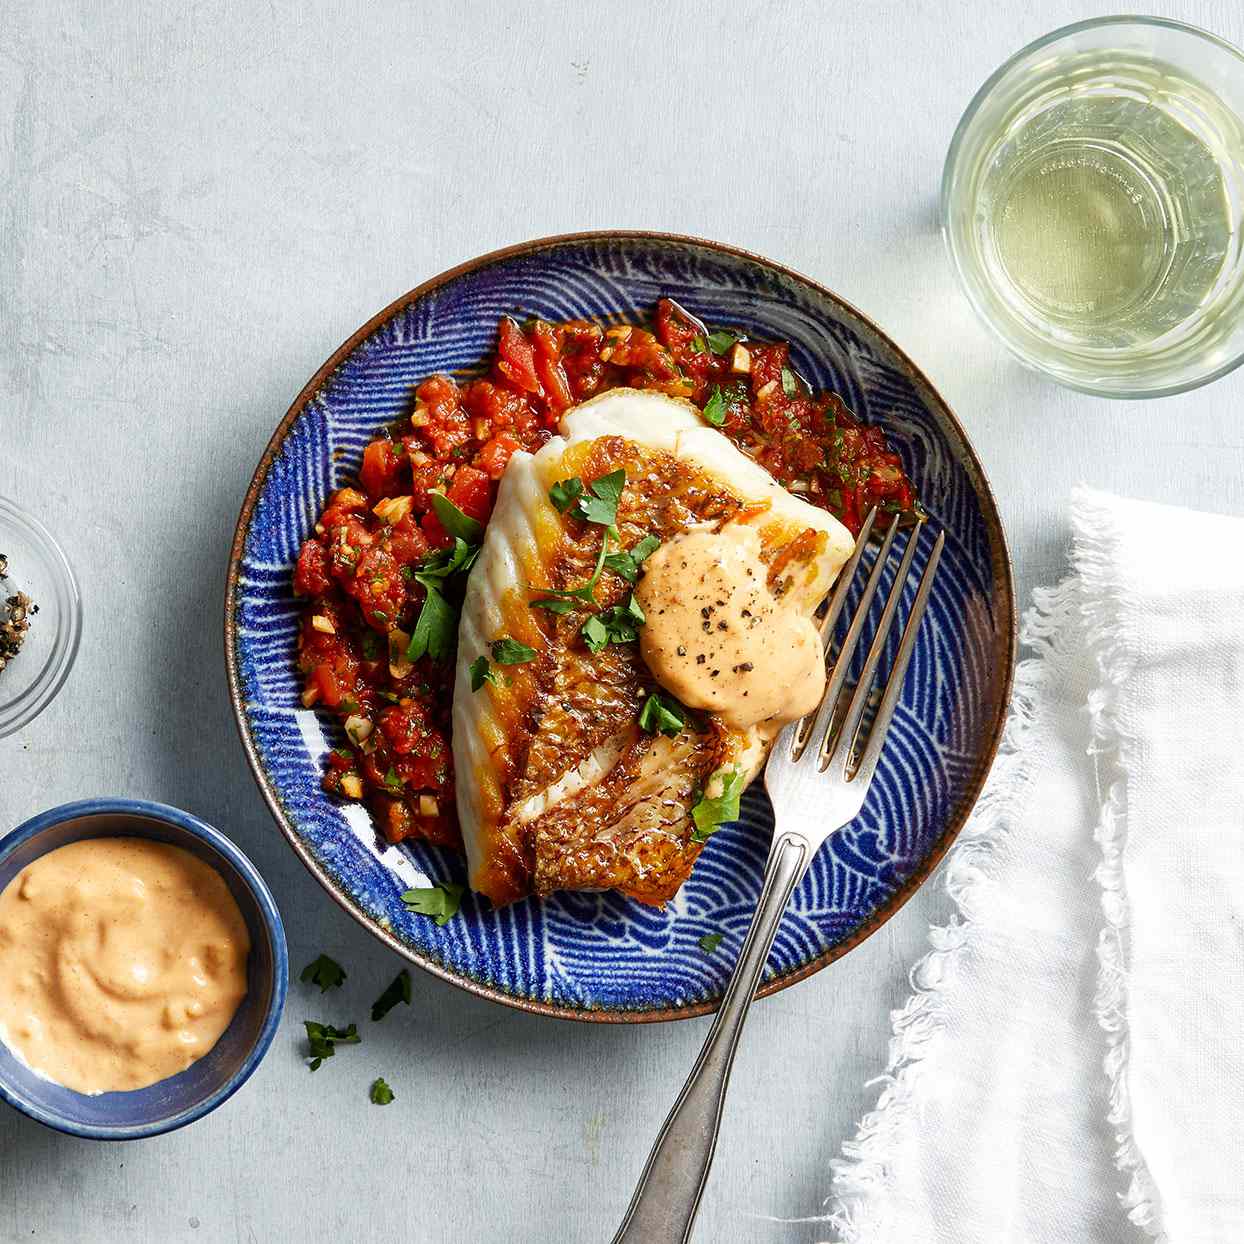 Pan-Seared Snapper with Red Pepper Relish & Garlic Mayo